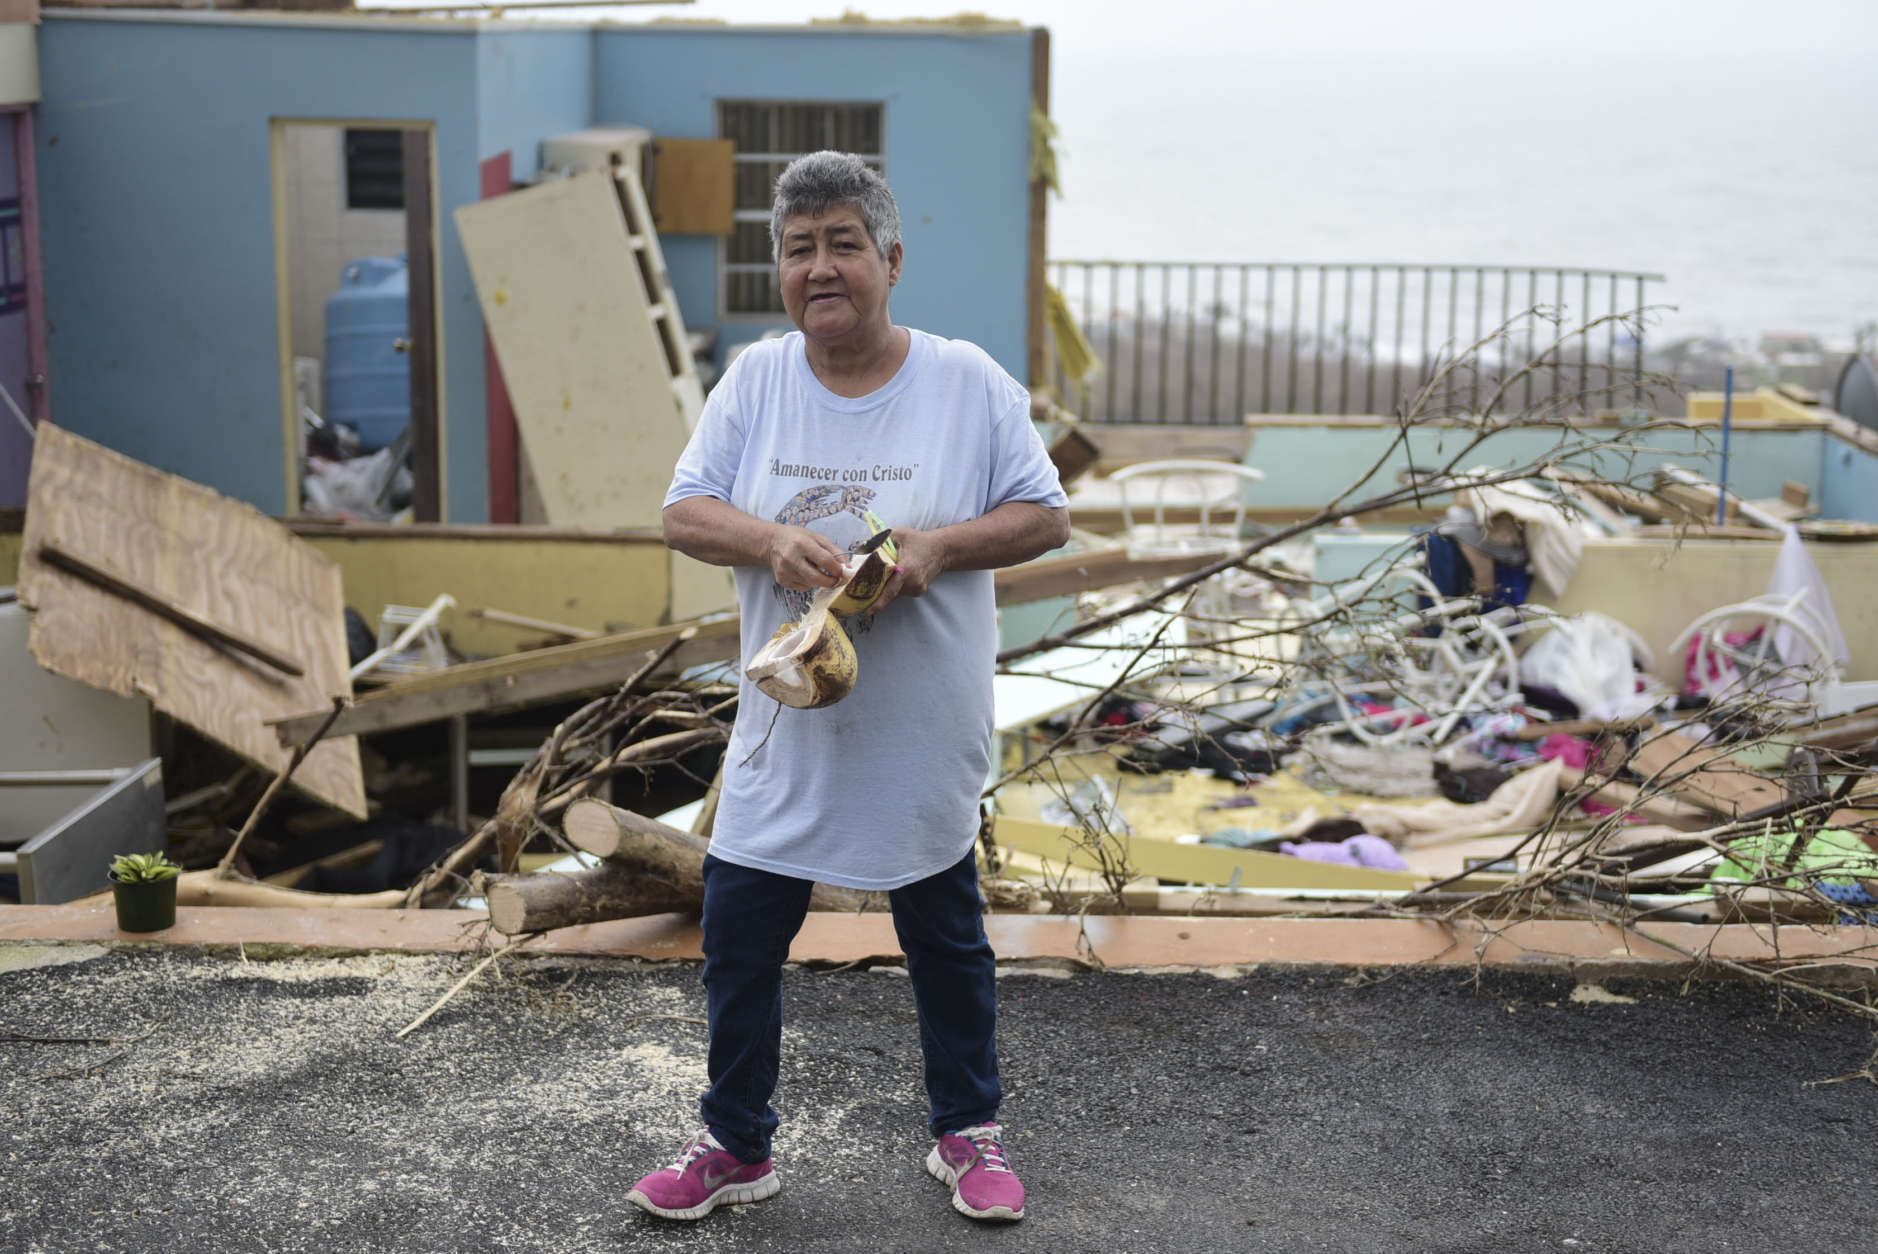 "Whats important is ones life" says Rufina Fernandez standing in front of her daughters ruined house while eating a coconut a day after the impact of Hurricane Maria, in Yabucoa, Puerto Rico, Thursday, September 21, 2017. As of Thursday evening, Maria was moving off the northern coast of the Dominican Republic with winds of 120 mph (195 kph). The storm was expected to approach the Turks and Caicos Islands and the Bahamas late Thursday and early Friday. (AP Photo/Carlos Giusti)